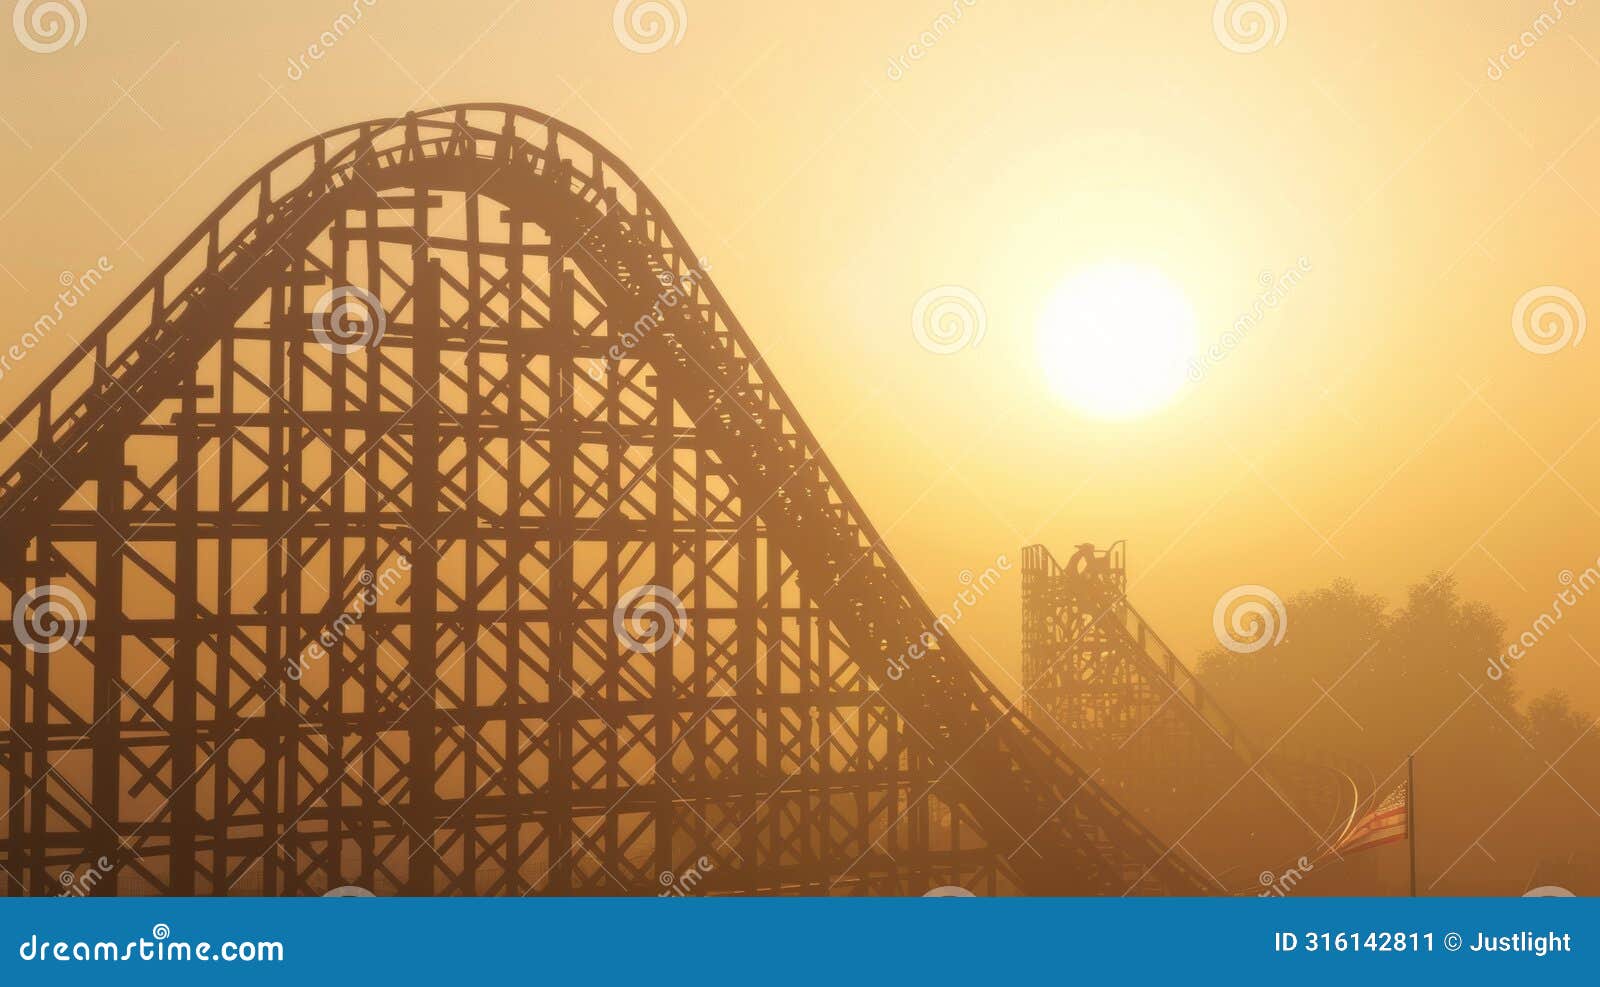 the distant silhouette of a towering roller coaster against a hazy sunlit sky hinting at the thrill of plunging speeds